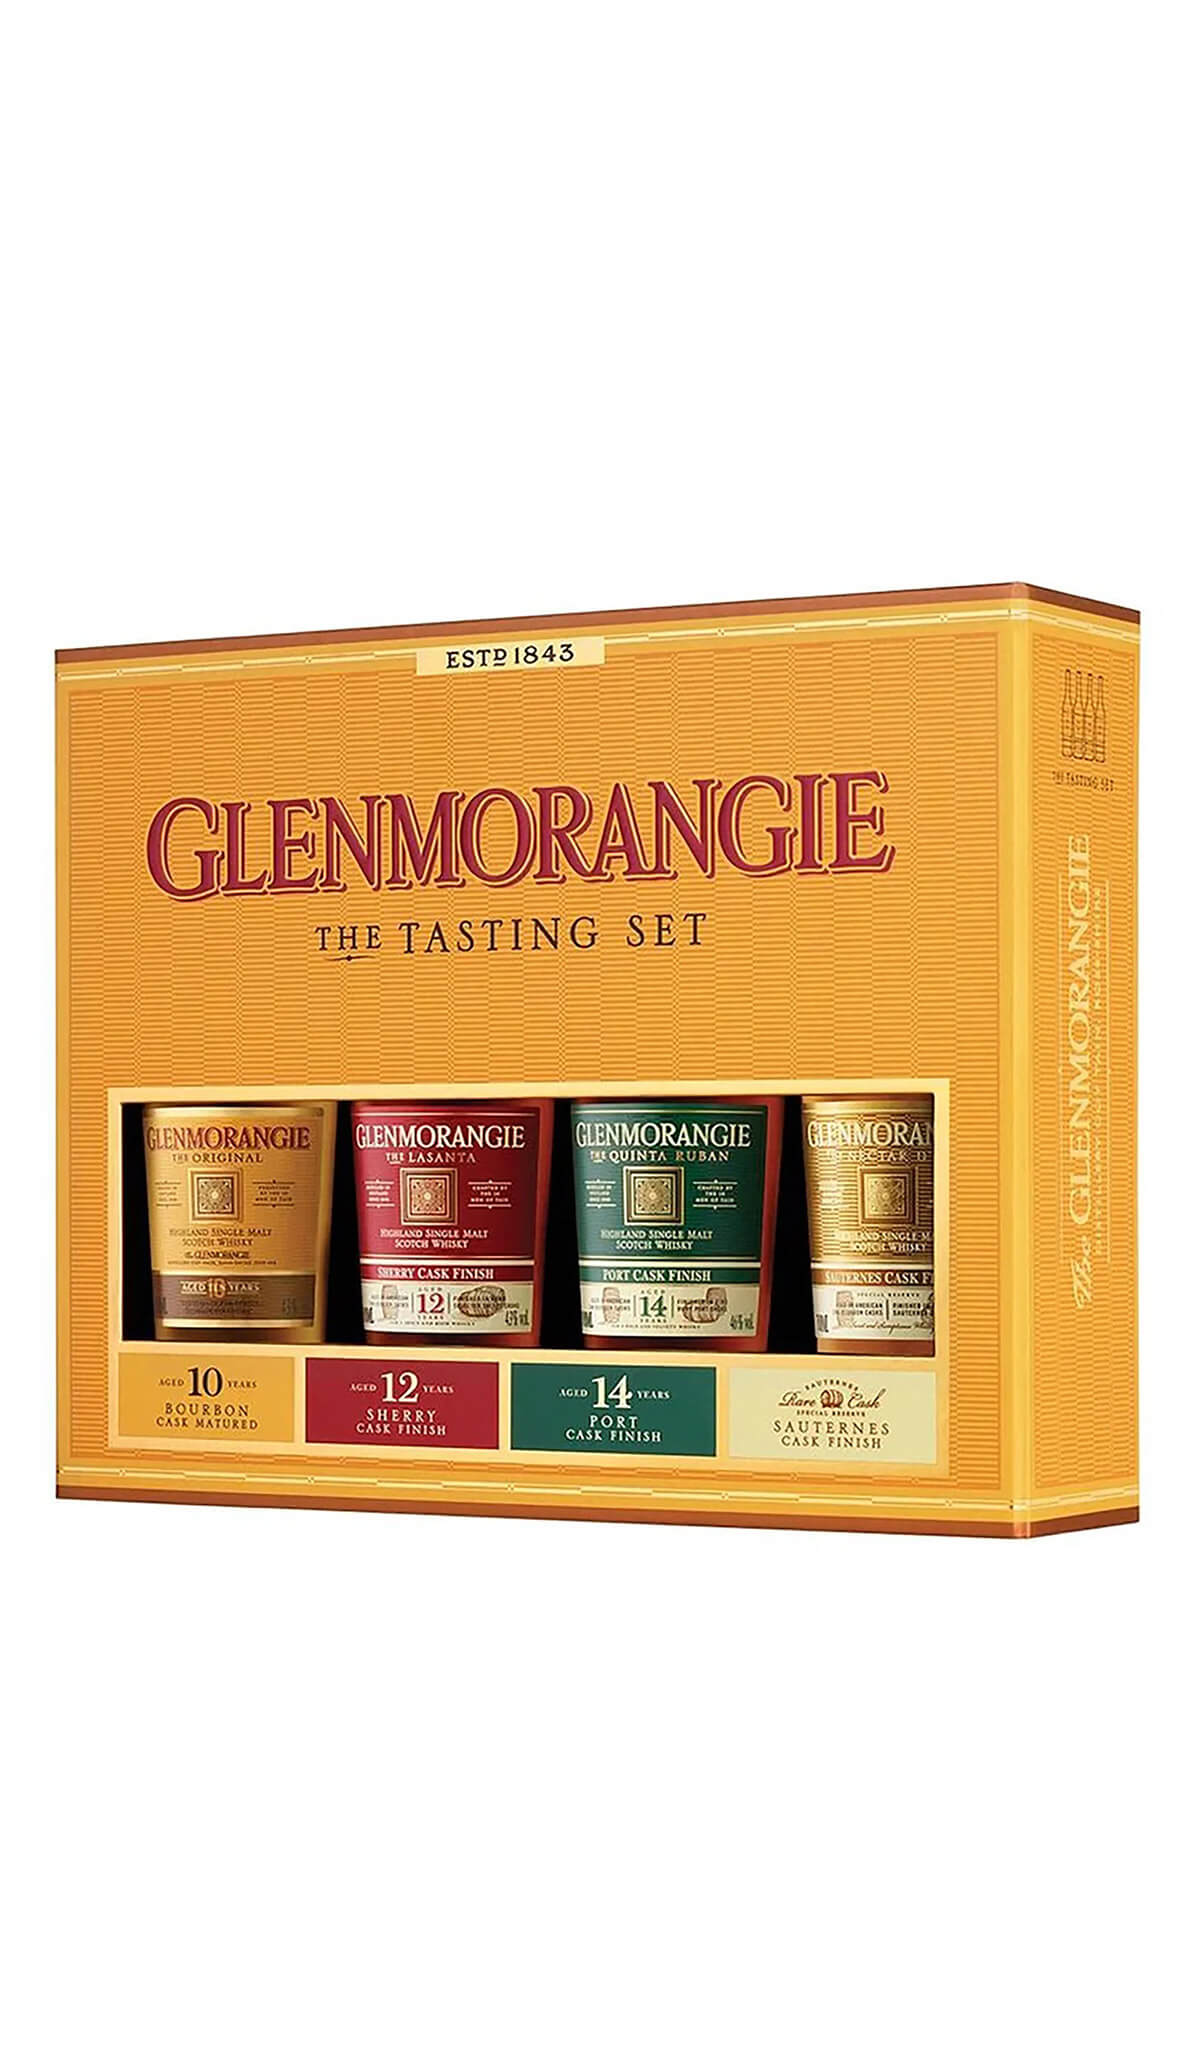 Find out more, explore the range and purchase Glenmorangie Tasting Pack Scotch Whisky 4 x 100mL available online at Wine Sellers Direct - Australia's independent liquor specialists.